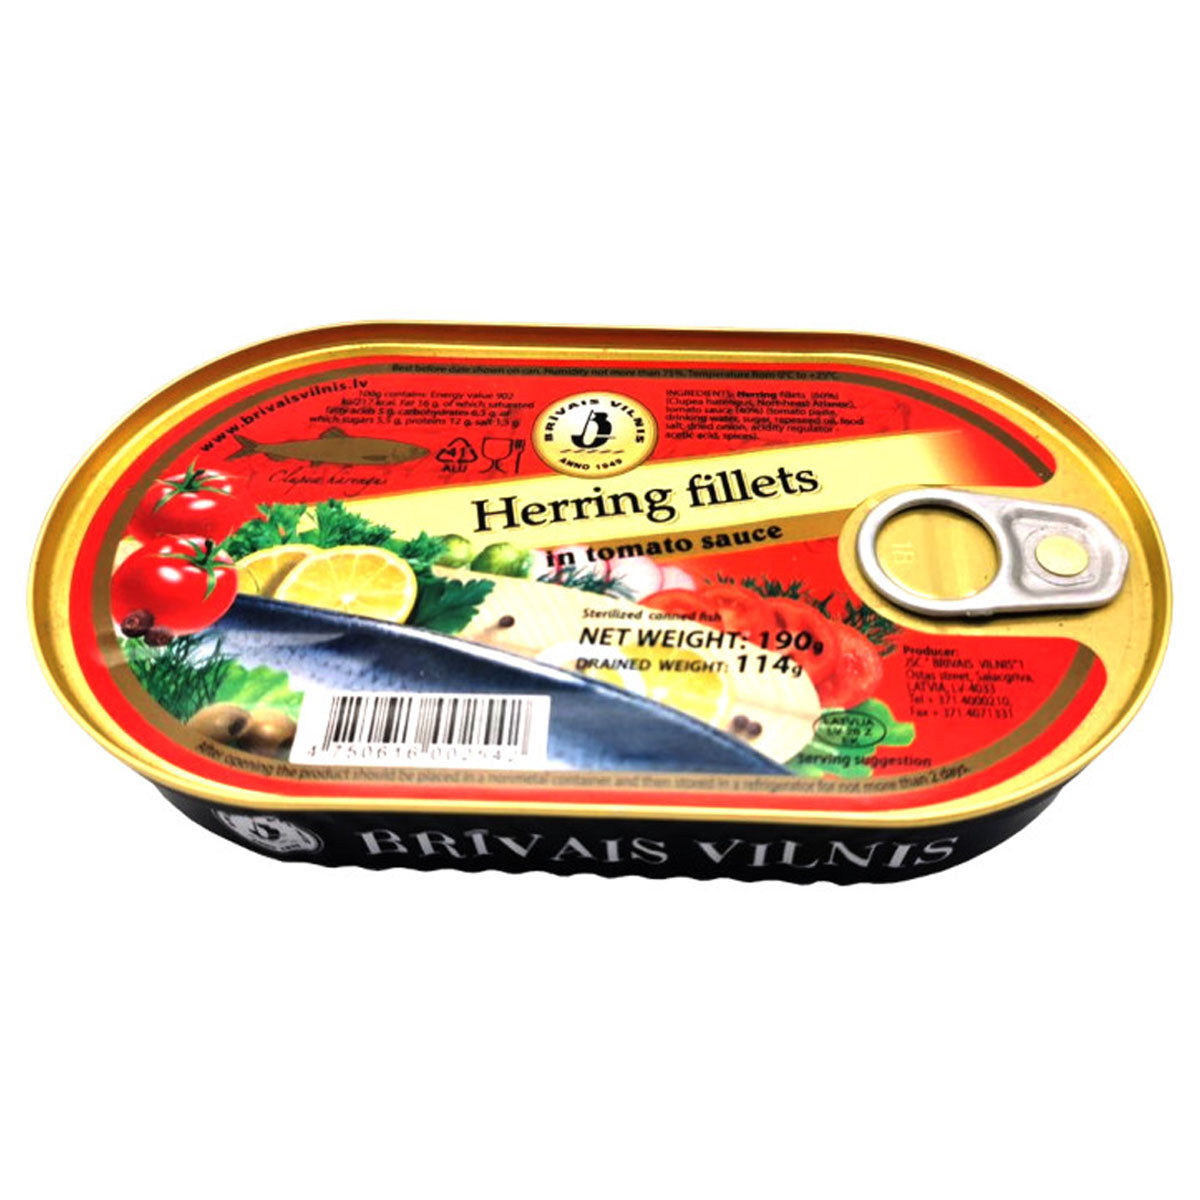 A can of Brivais Vilnis - Herring Fillets in Tomato Sauce - 190g on a white background.